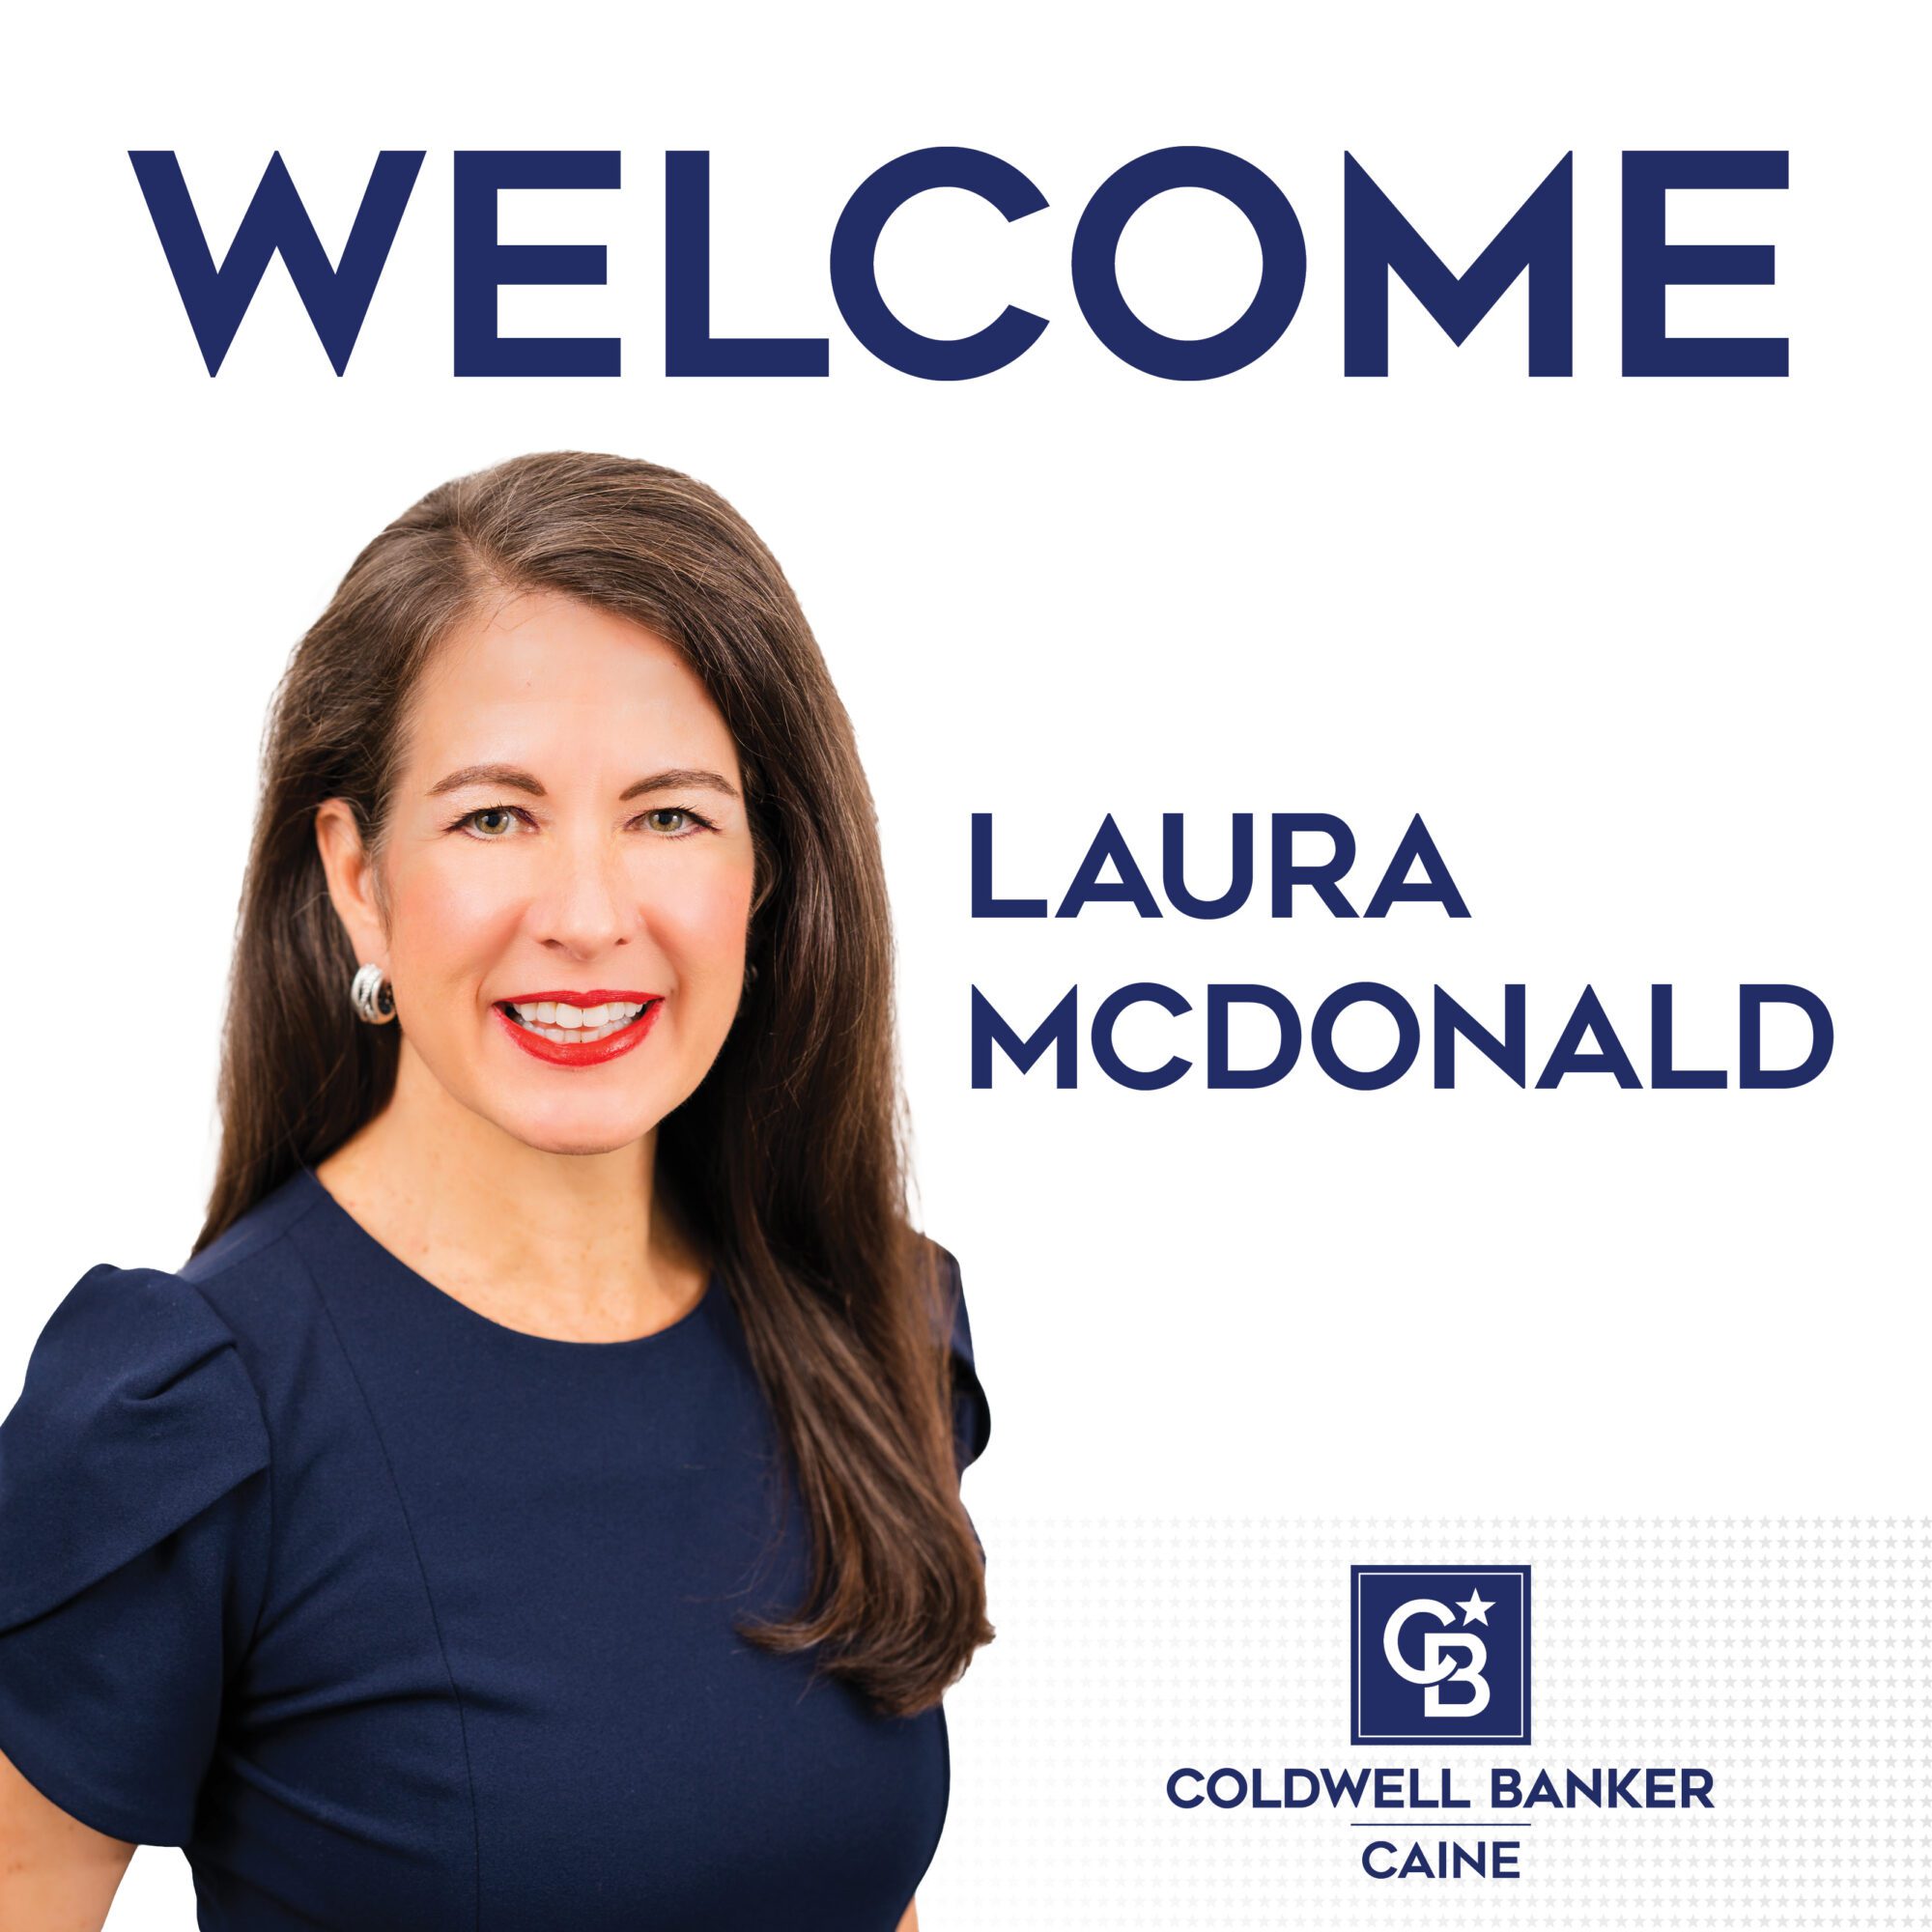 Laura McDonald Joins Coldwell Banker Caine in Greenville as Vice President of Sales, Broker